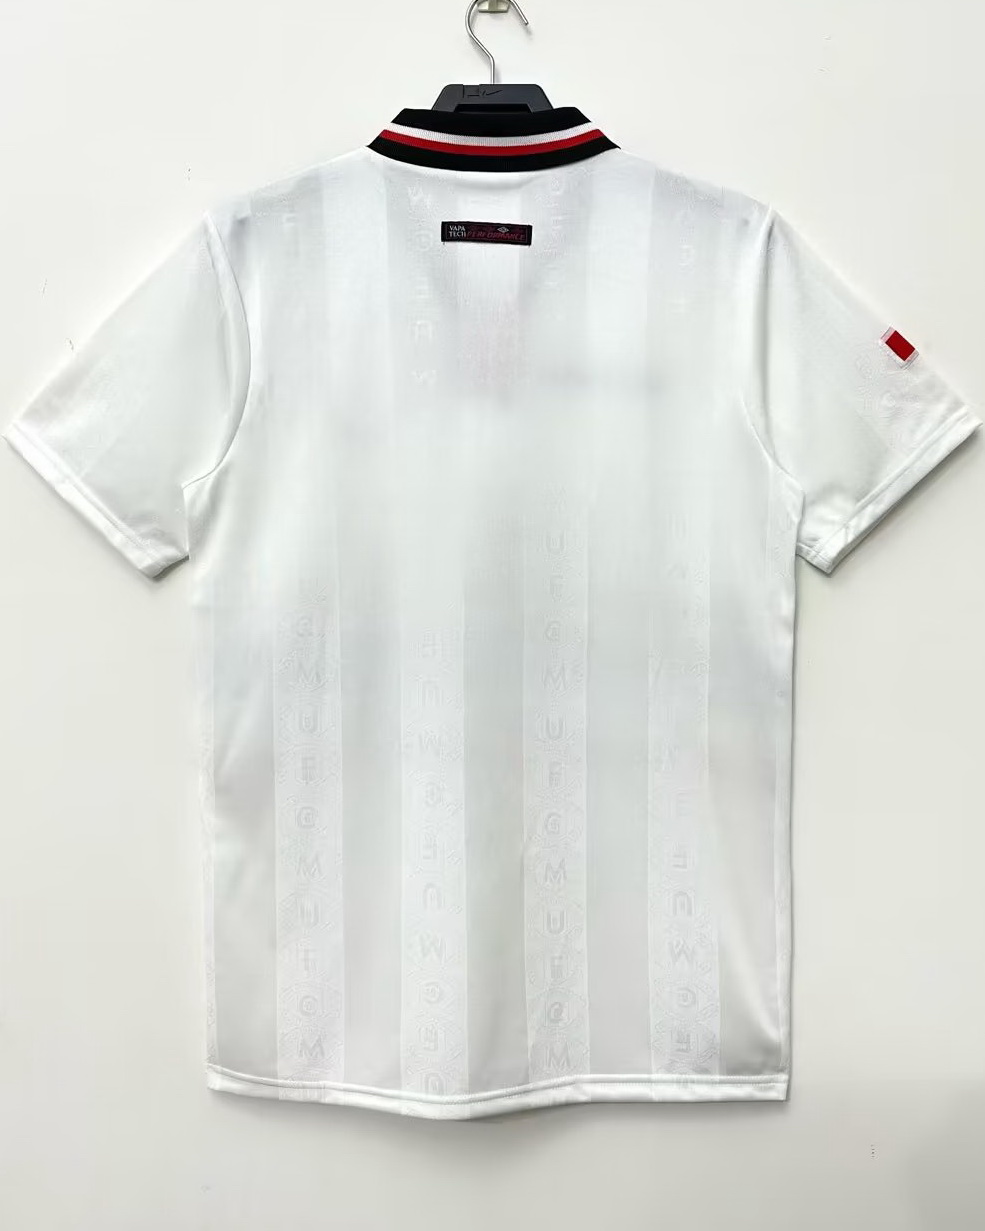 Manchester United 1998/99 Away White Jersey